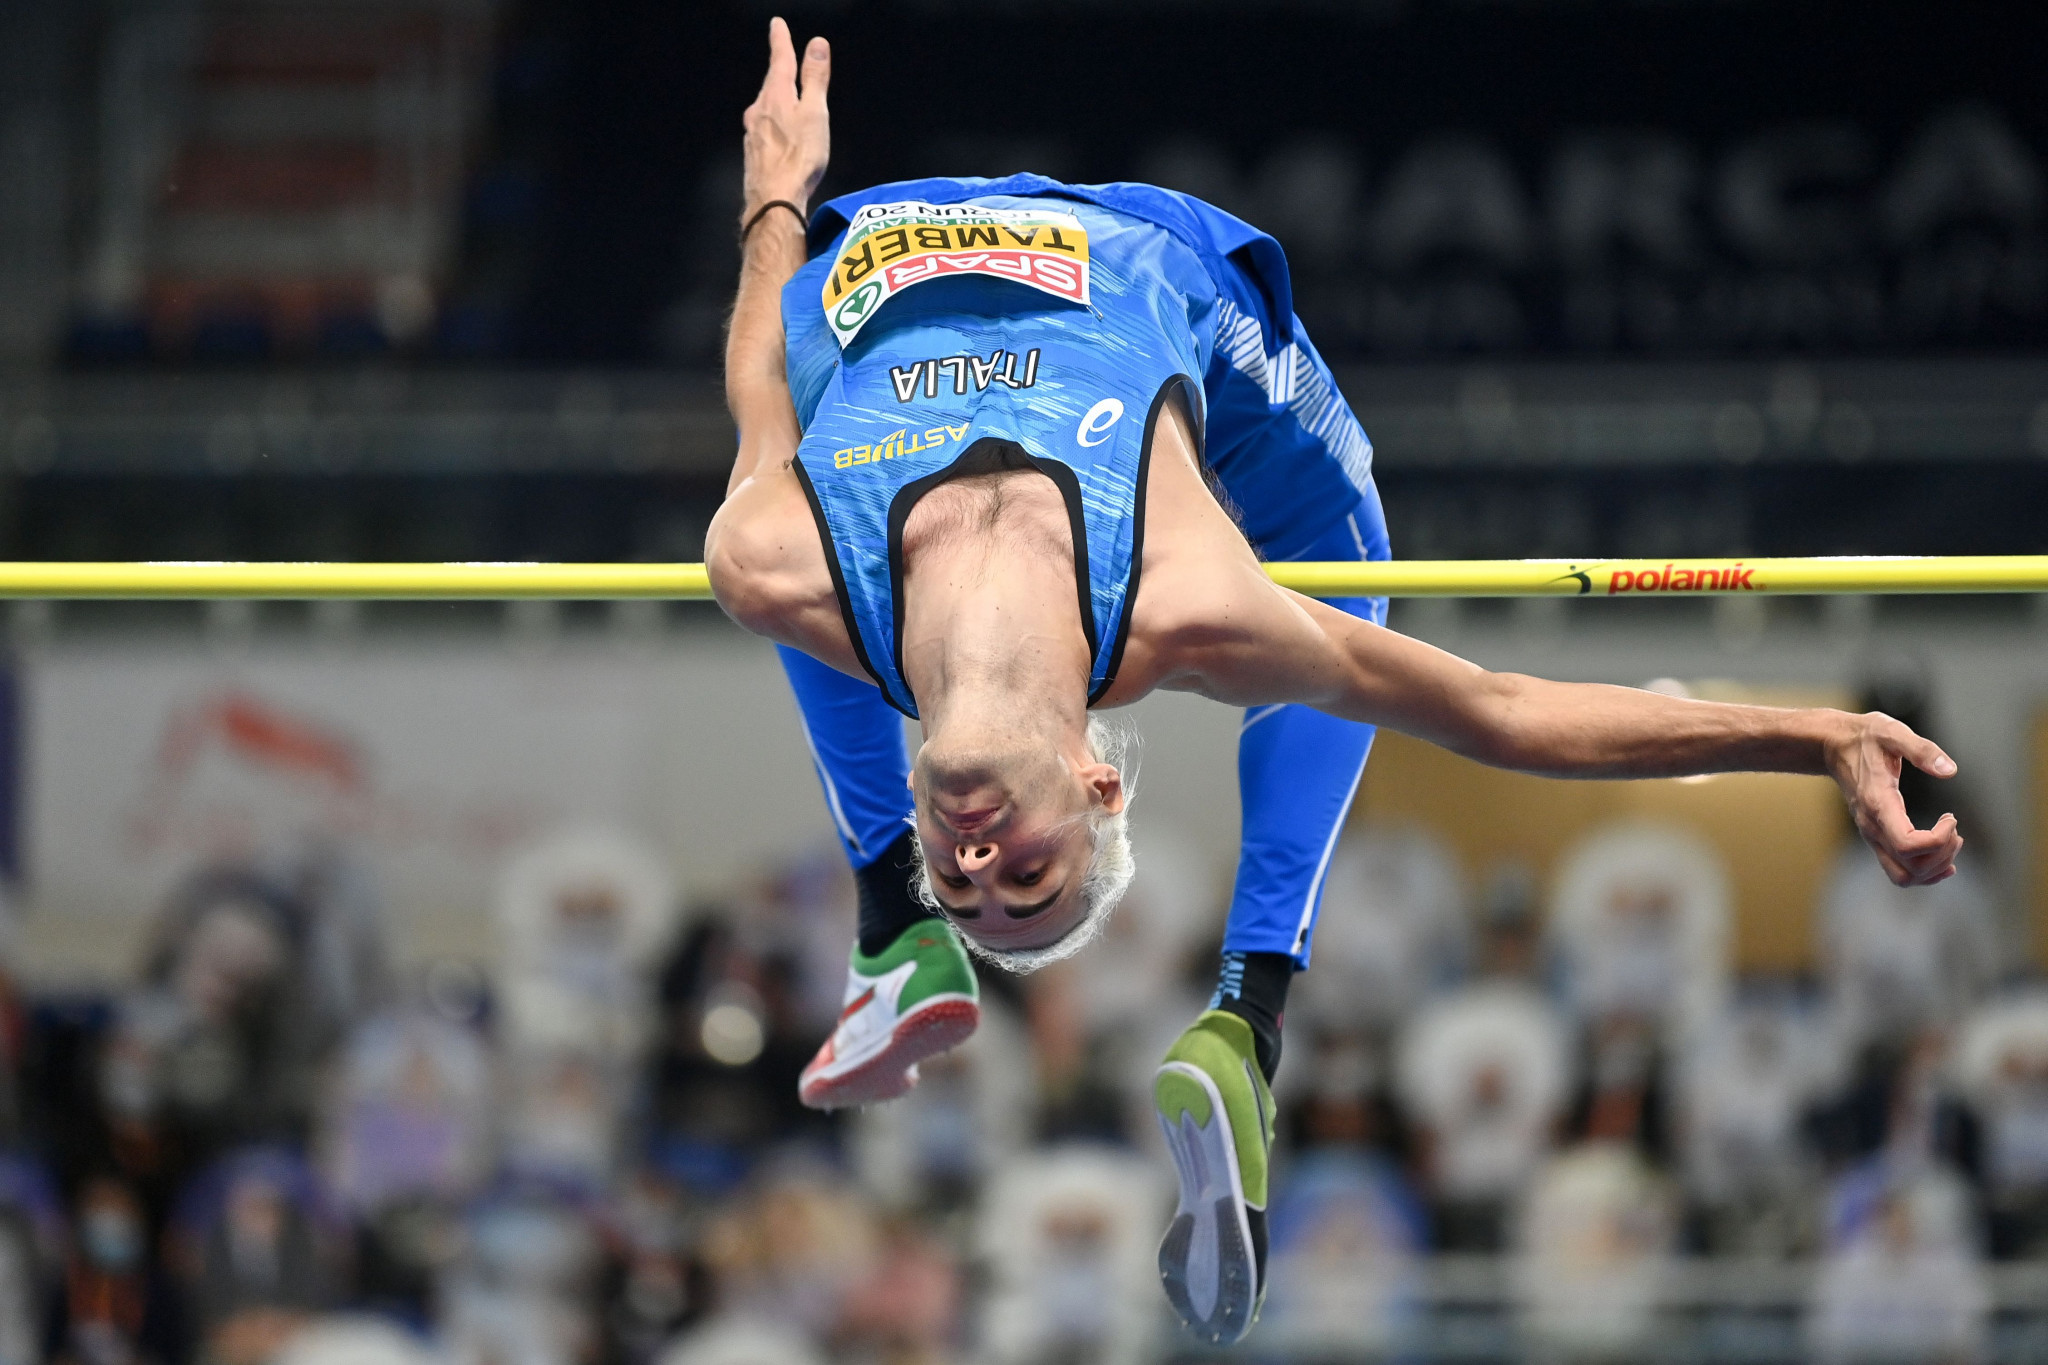 Gianmarco Tamberi cruised through to the men's high jump final ©Getty Images